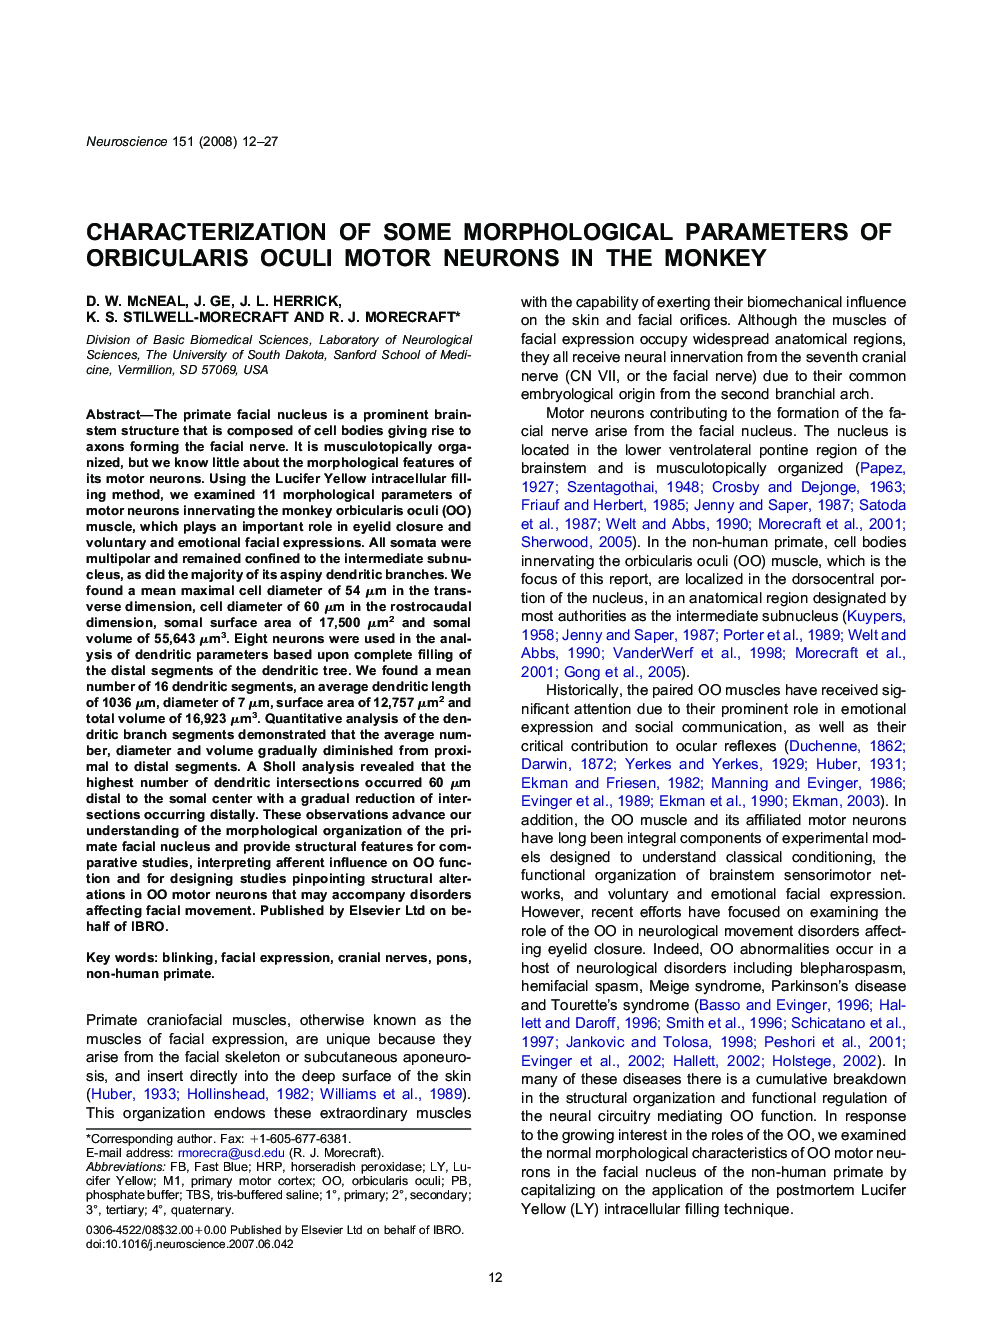 Characterization of some morphological parameters of orbicularis oculi motor neurons in the monkey